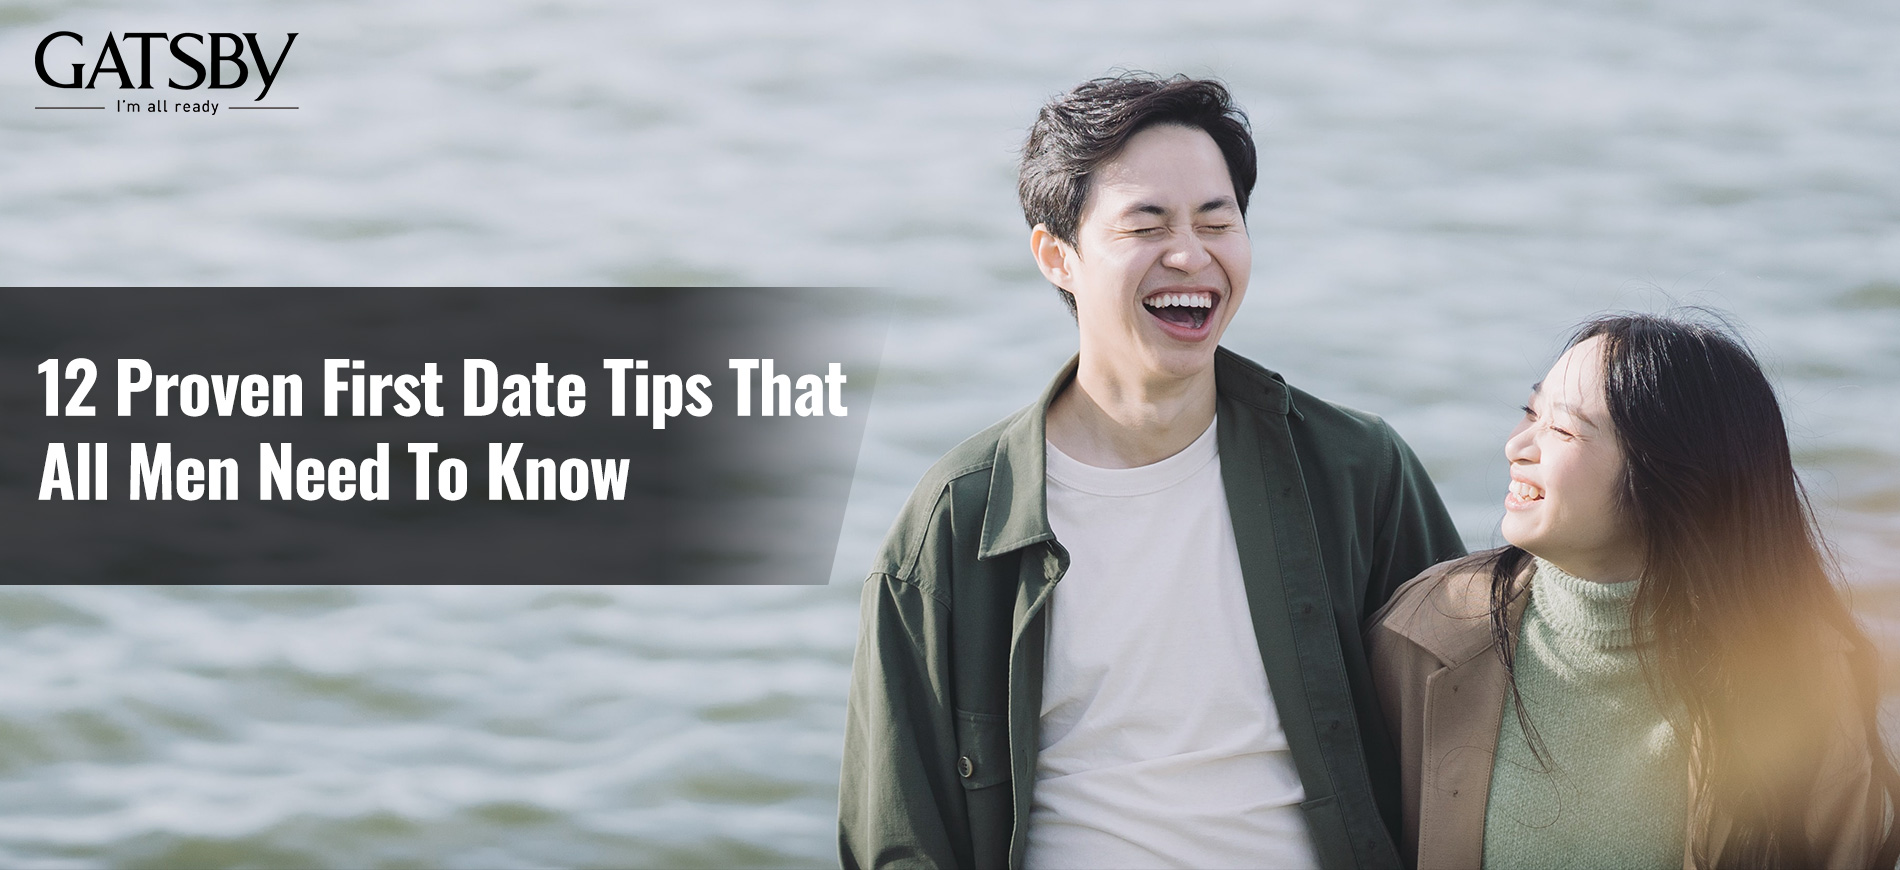 12 Proven First Date Tips That All Men Need To Know